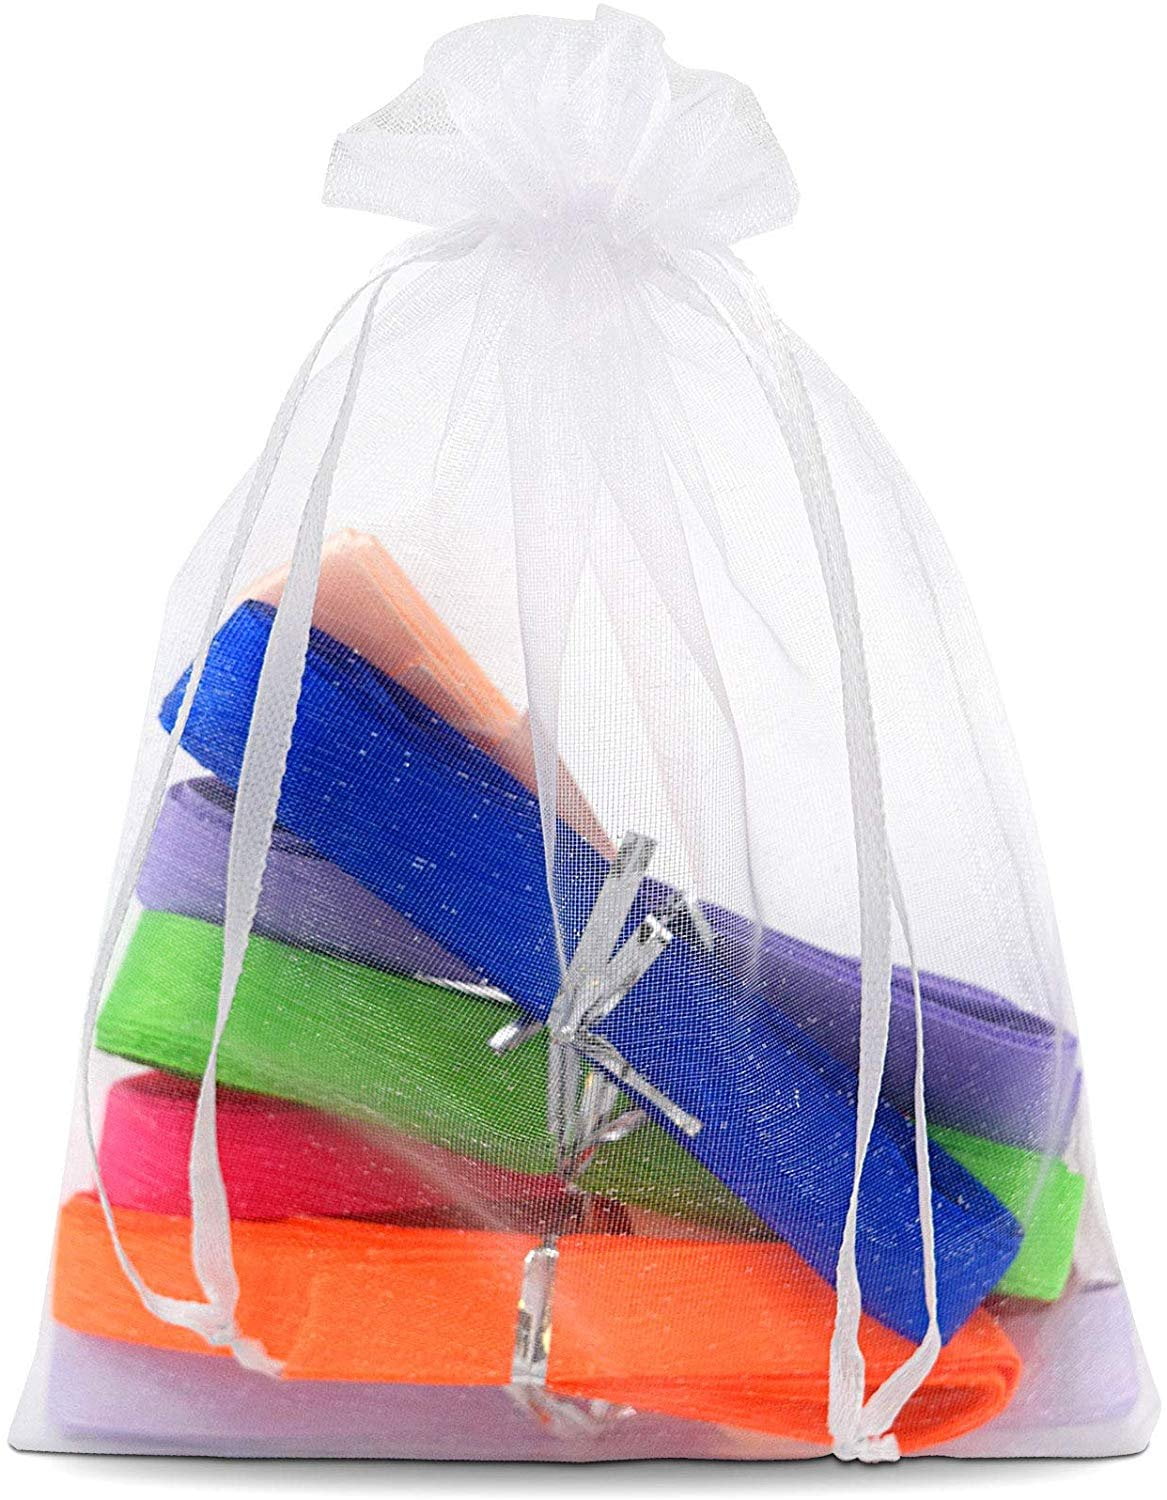 25/50/100 Pcs Organza Gift Bags Wedding Christmas Party Candy Jewellery Pouches 